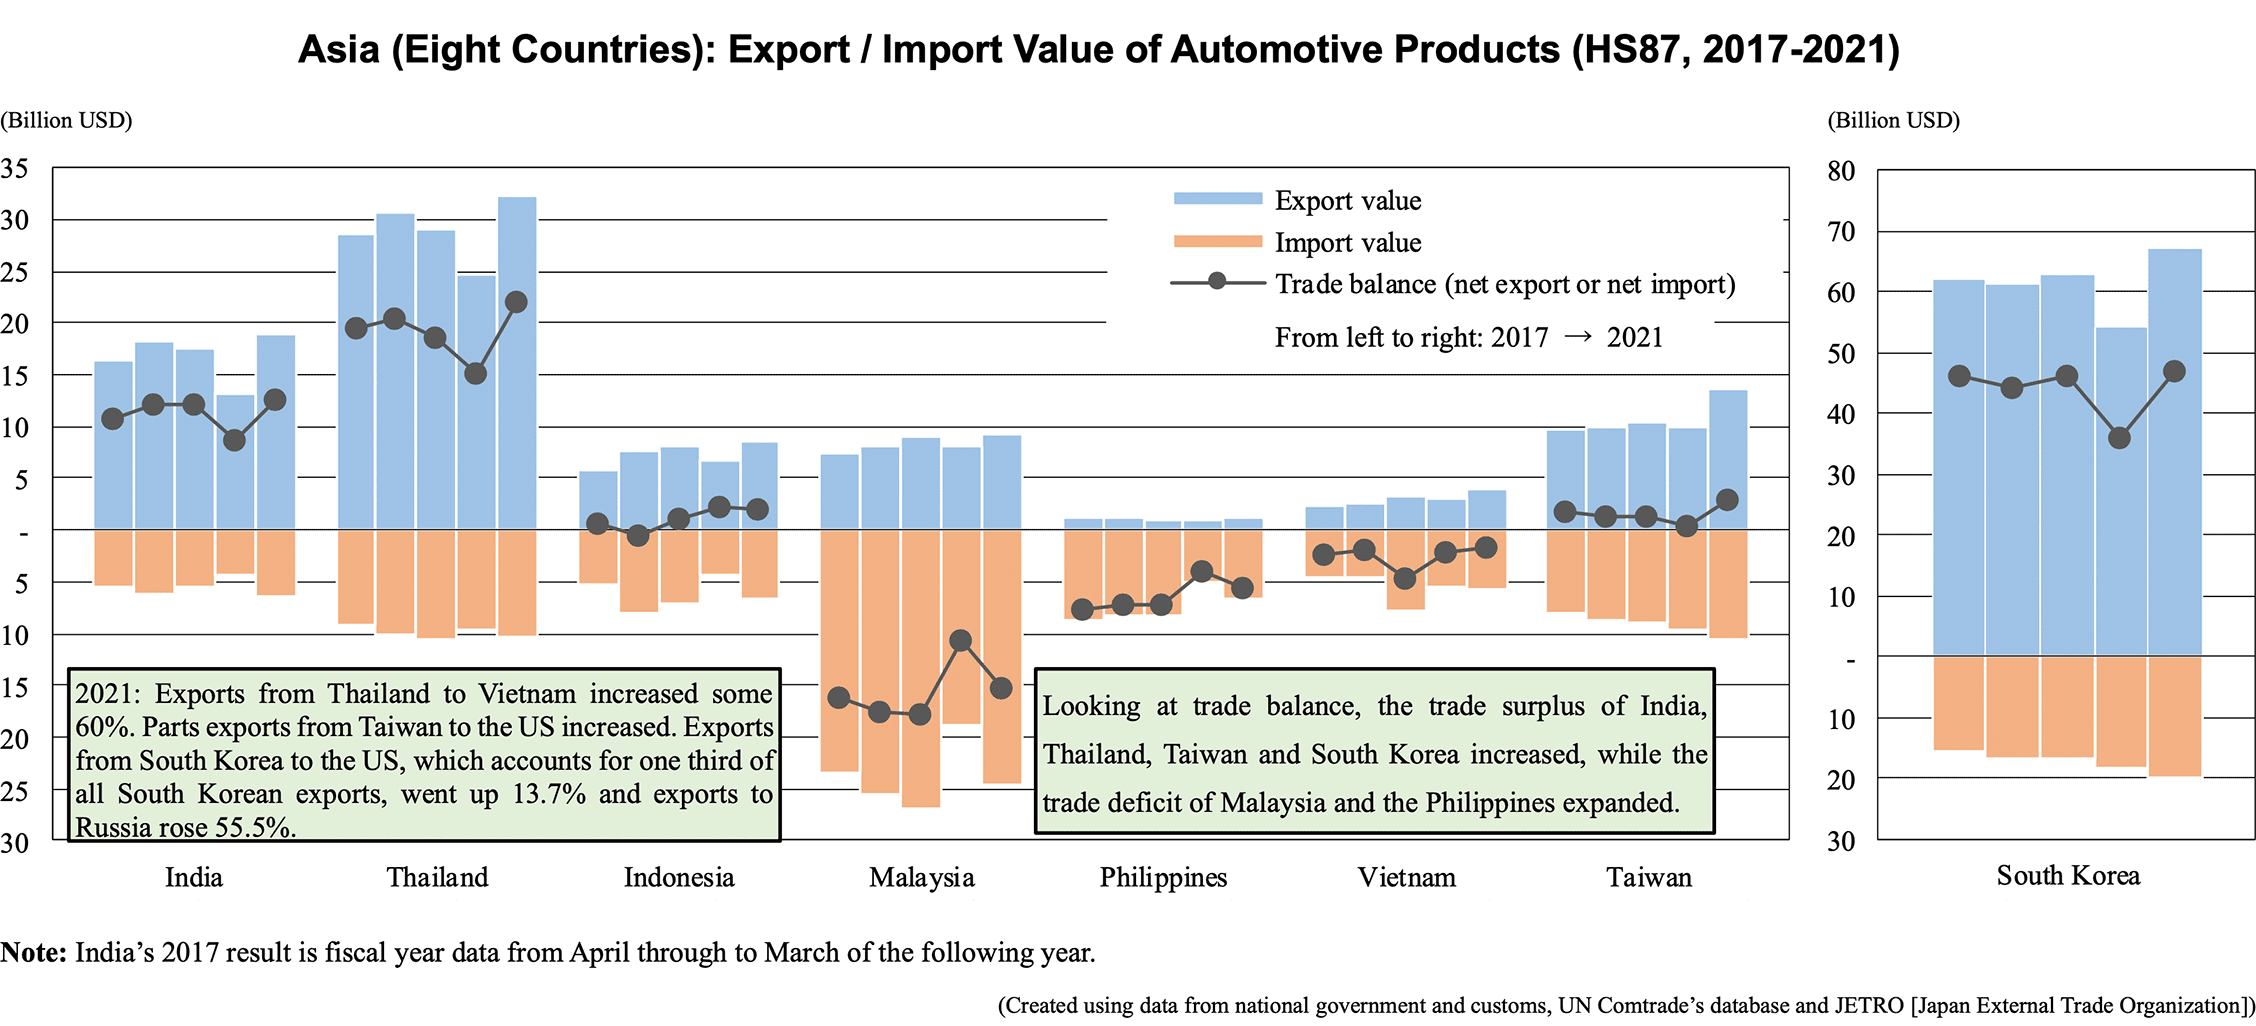 Bar graphs: Asia (Eight Countries): Export / Import Value of Automotive Products (HS87, 2017-2021)